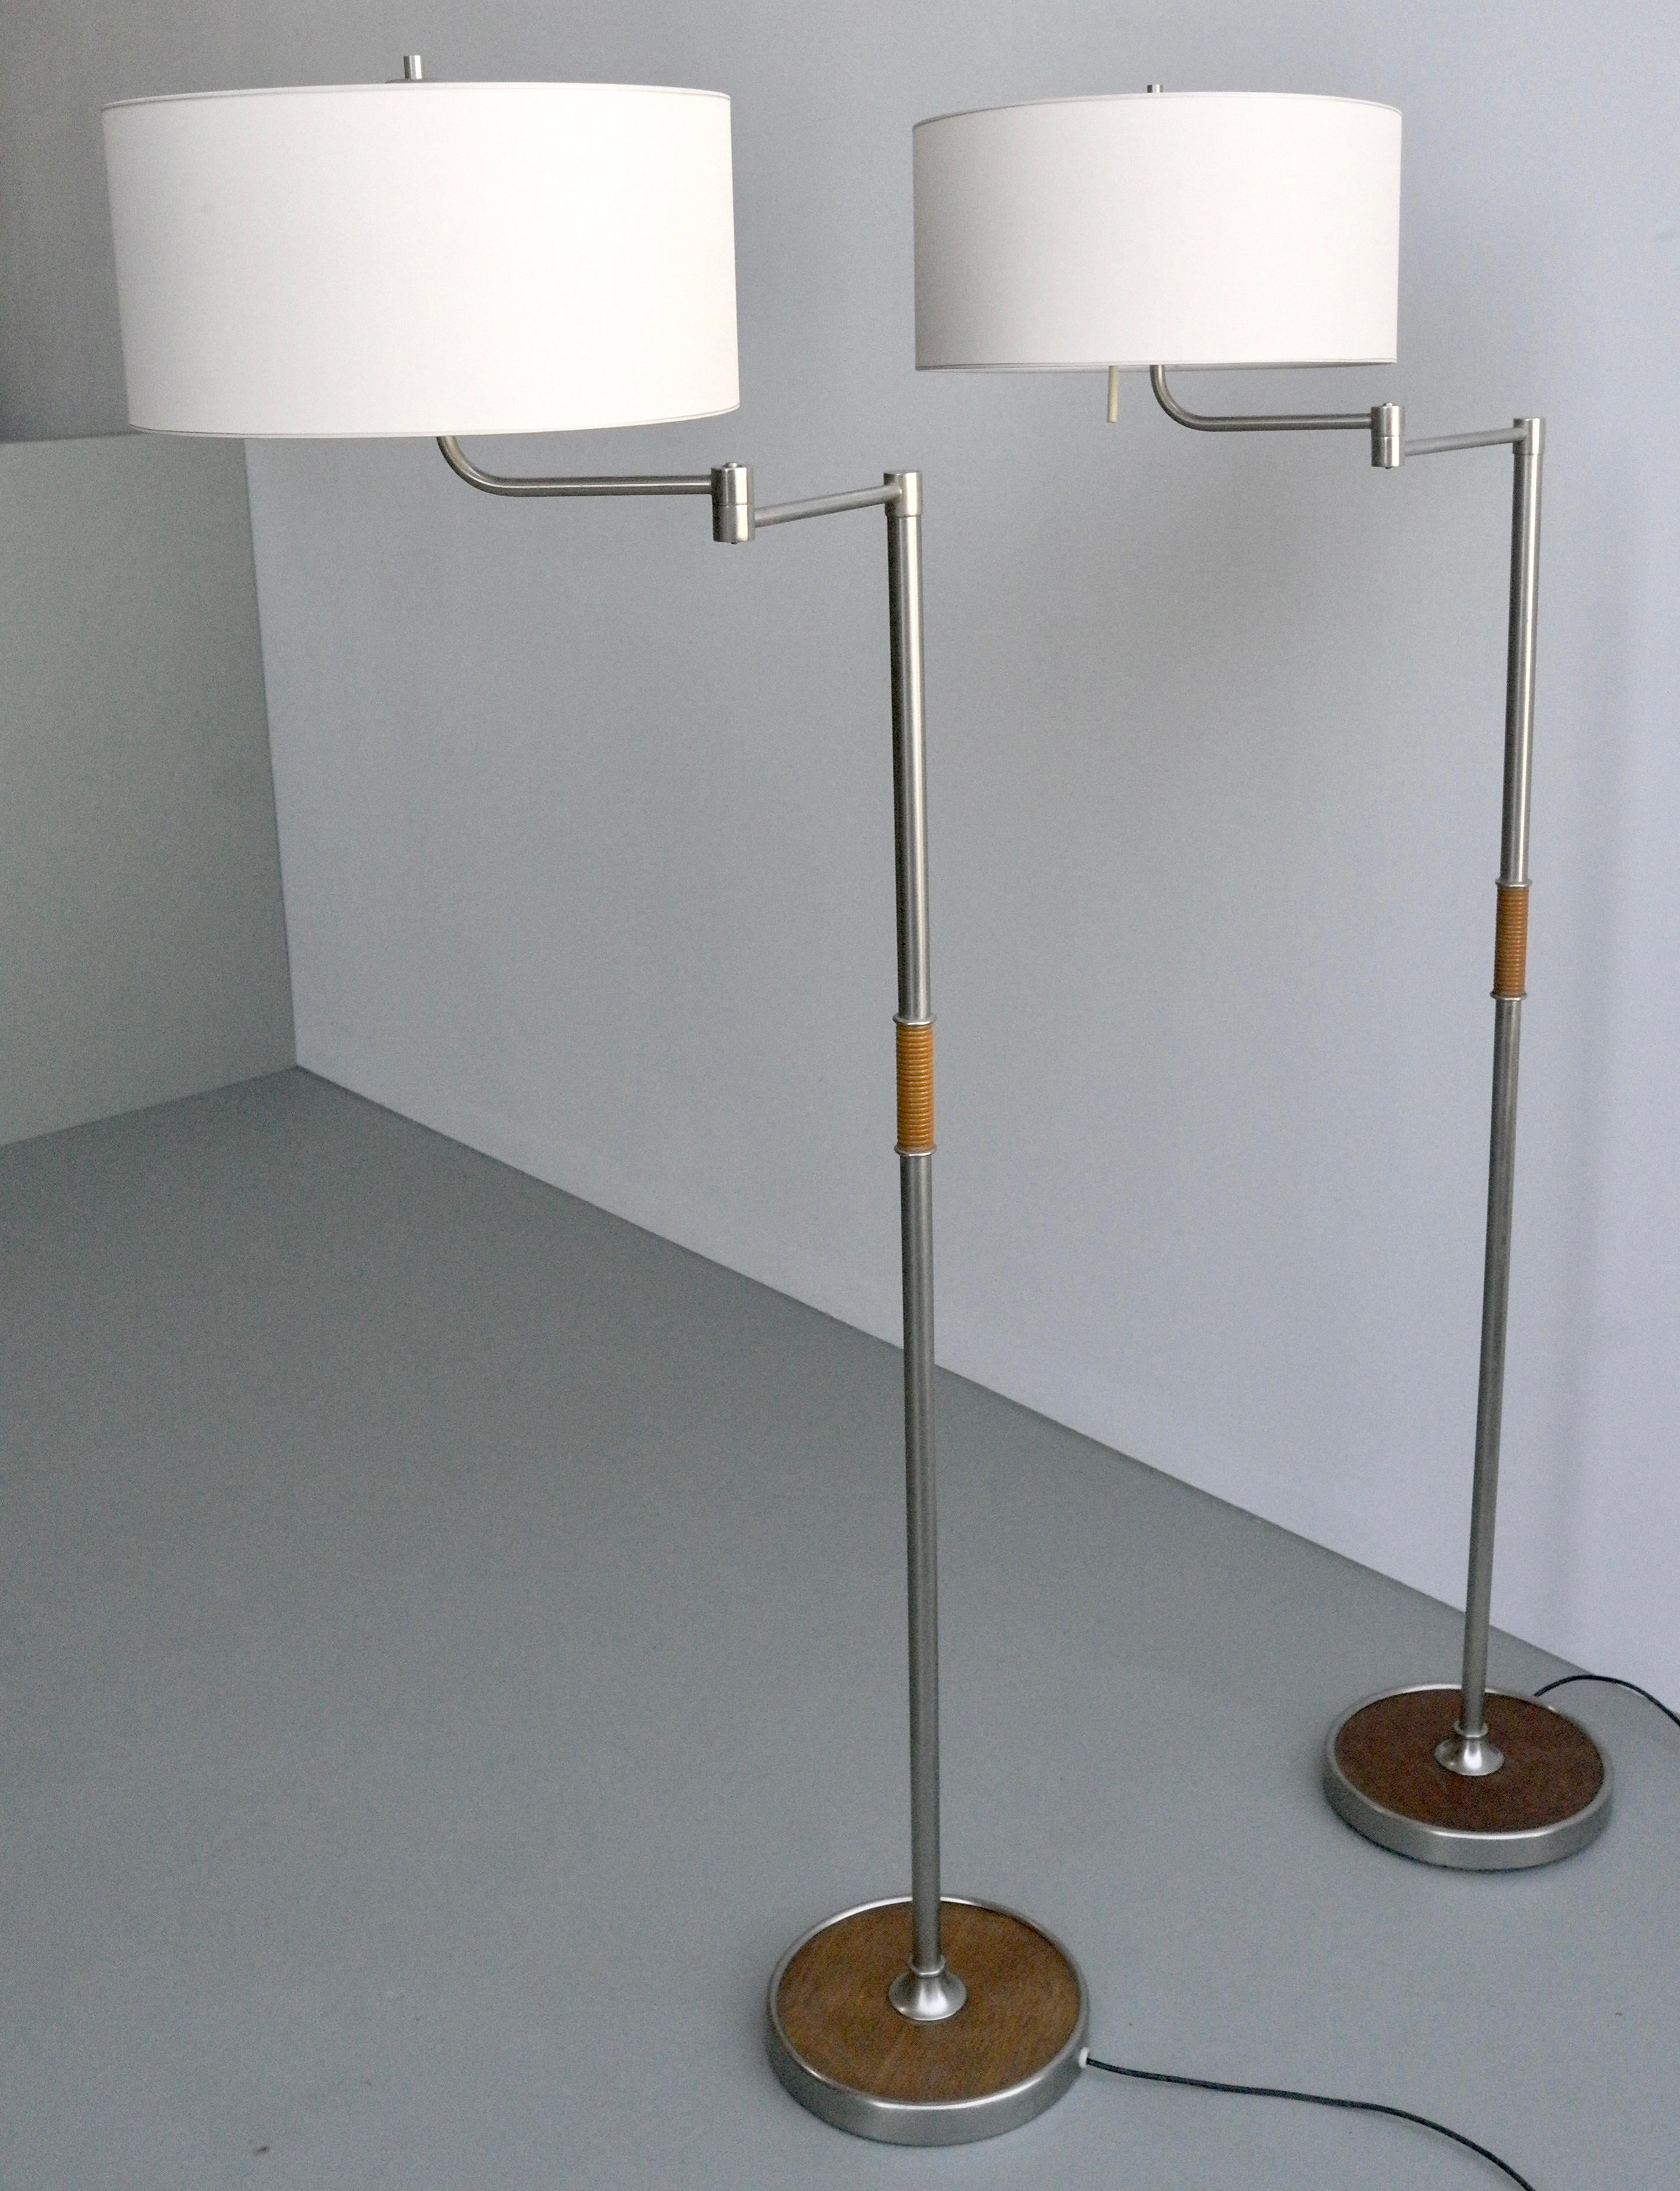 Pair of Mid Century Swing-Arm Floor Lamps in Metal with Faux Bamboo Wood details.

Adjustable in many positions. Height 162cm, diameter base 30cm.